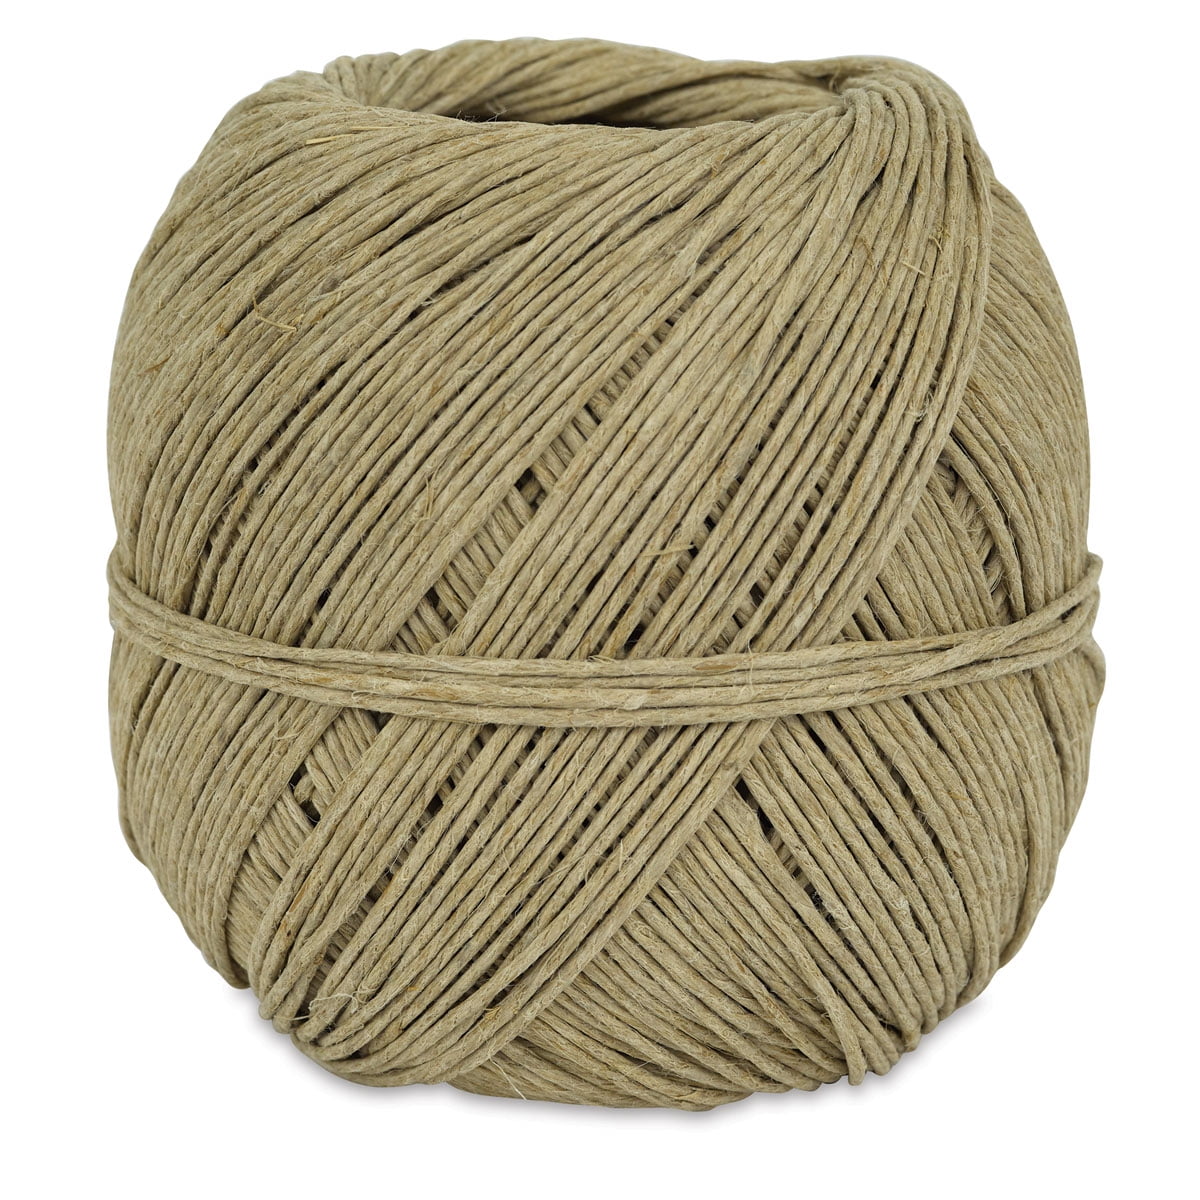 Buy hemp string Products At Sale Prices Online - January 2024